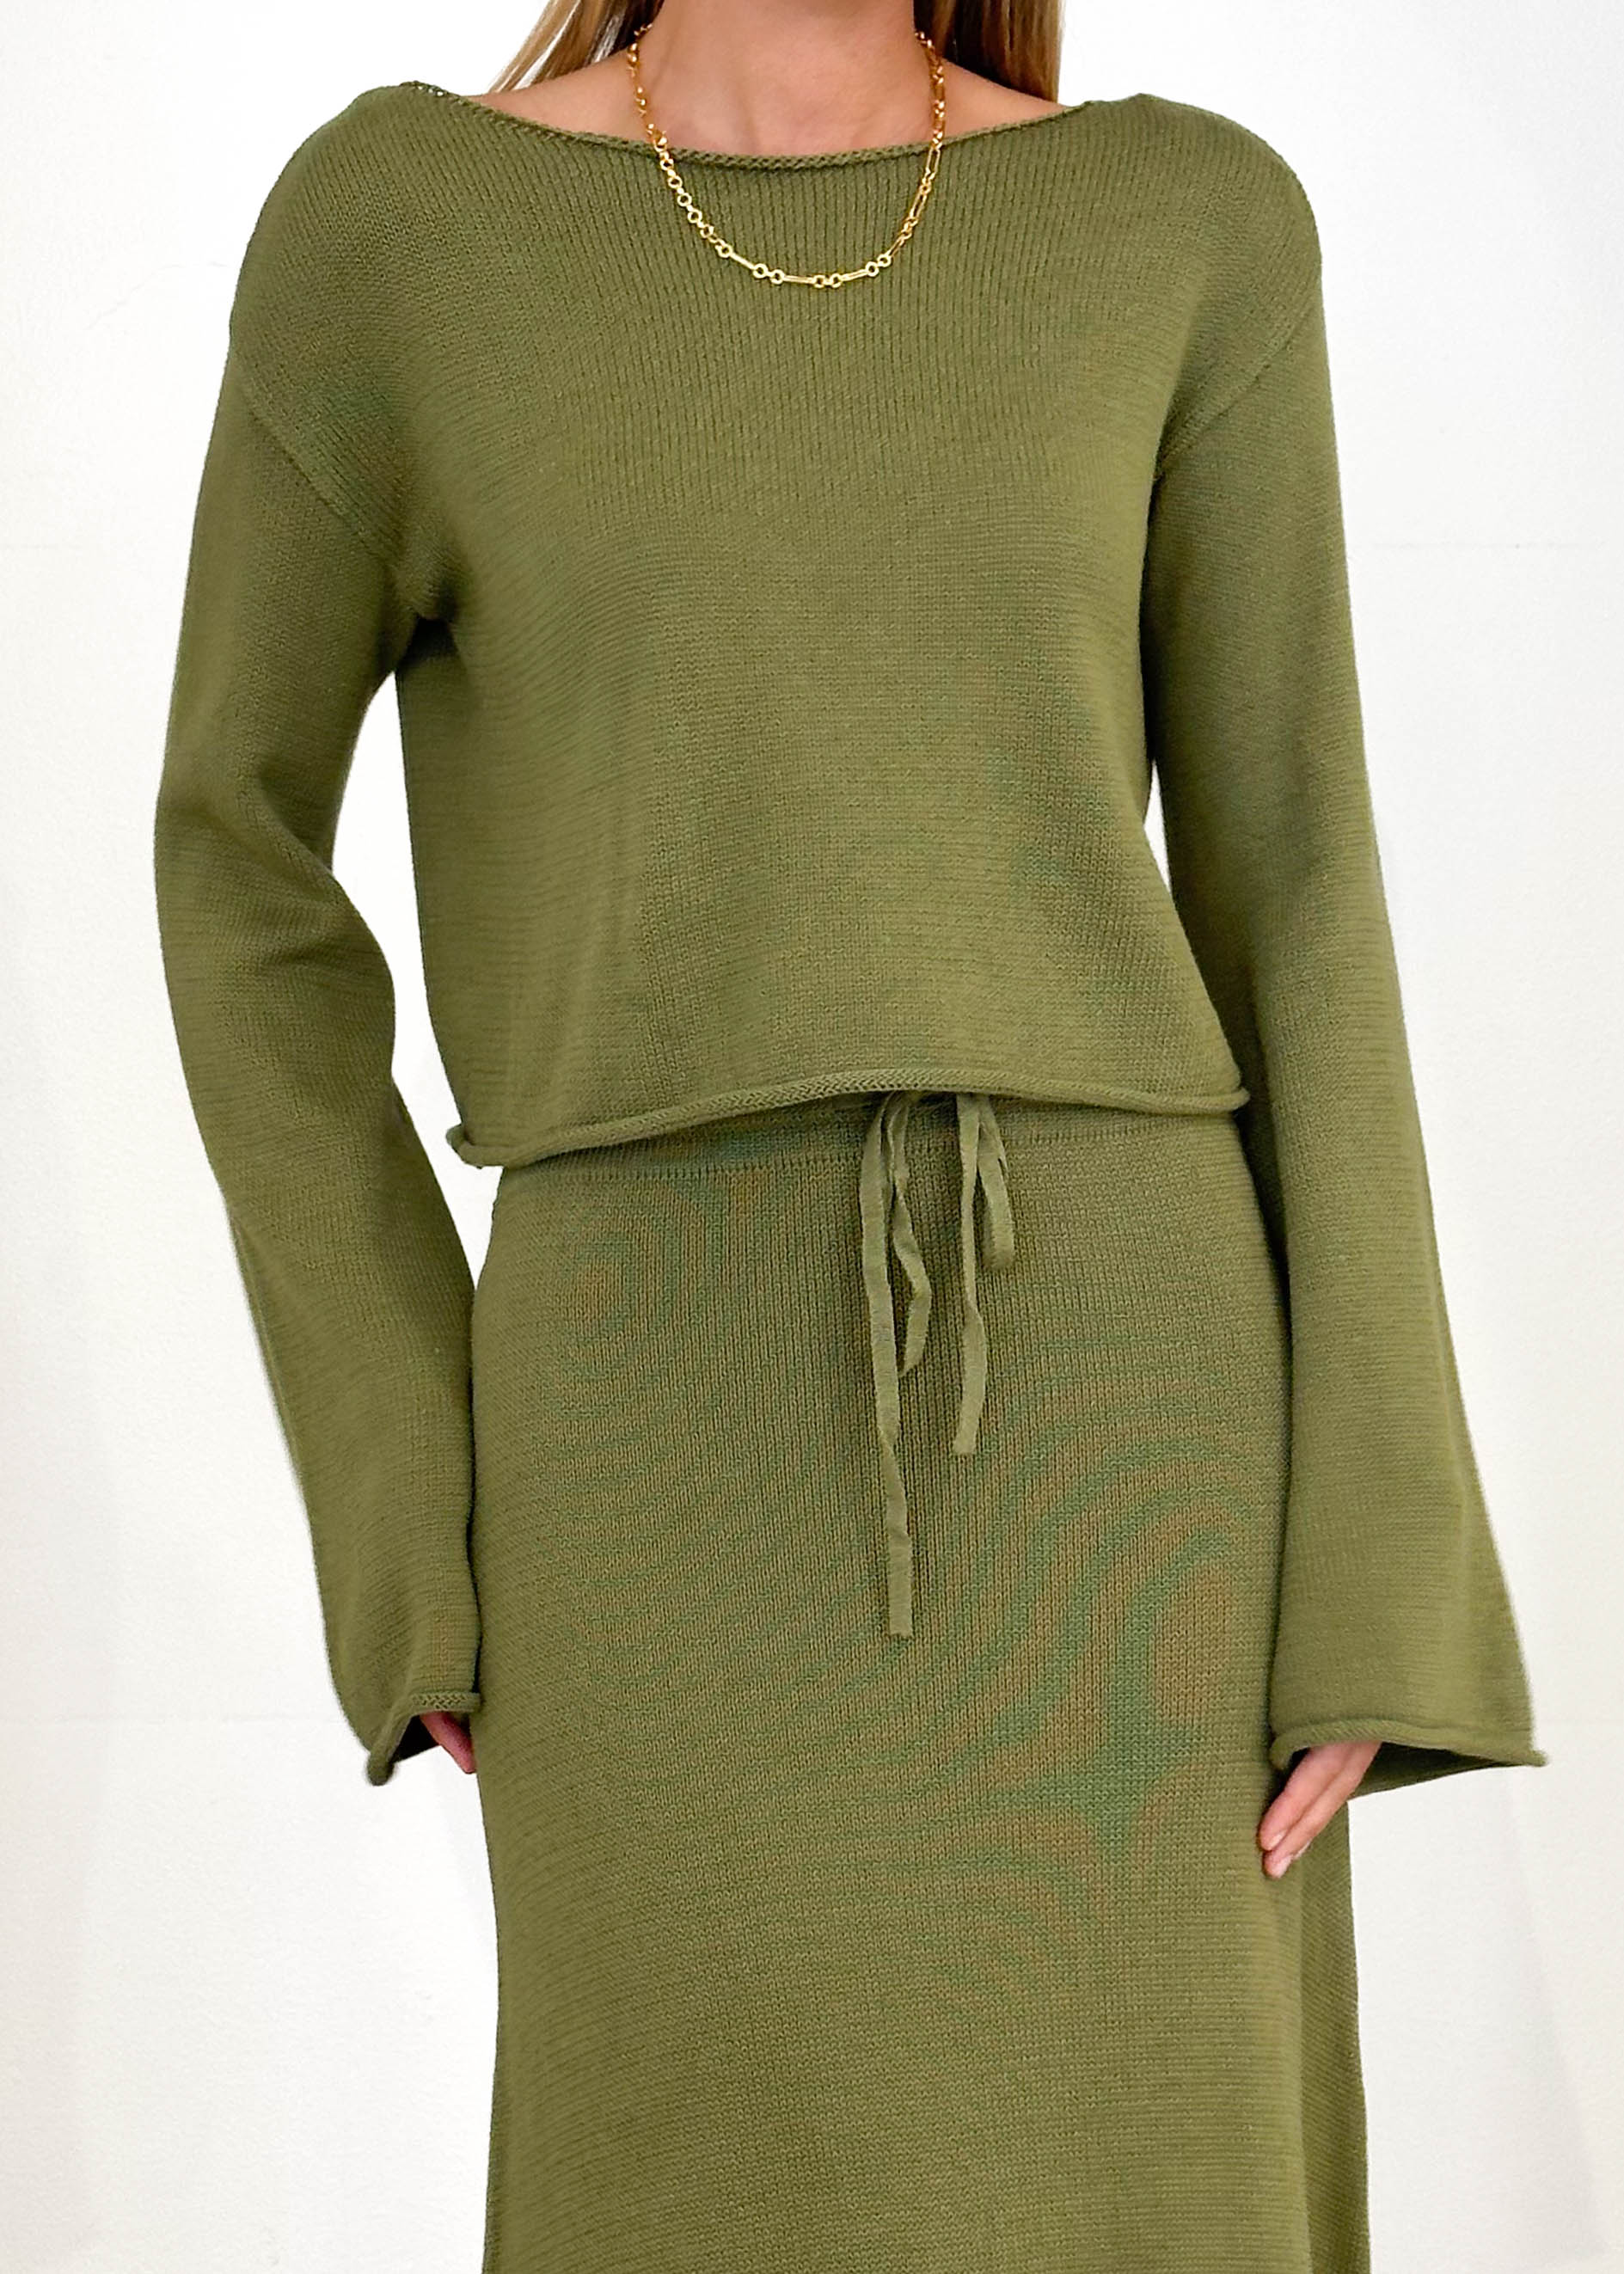 Emerson Knit Top - Olive